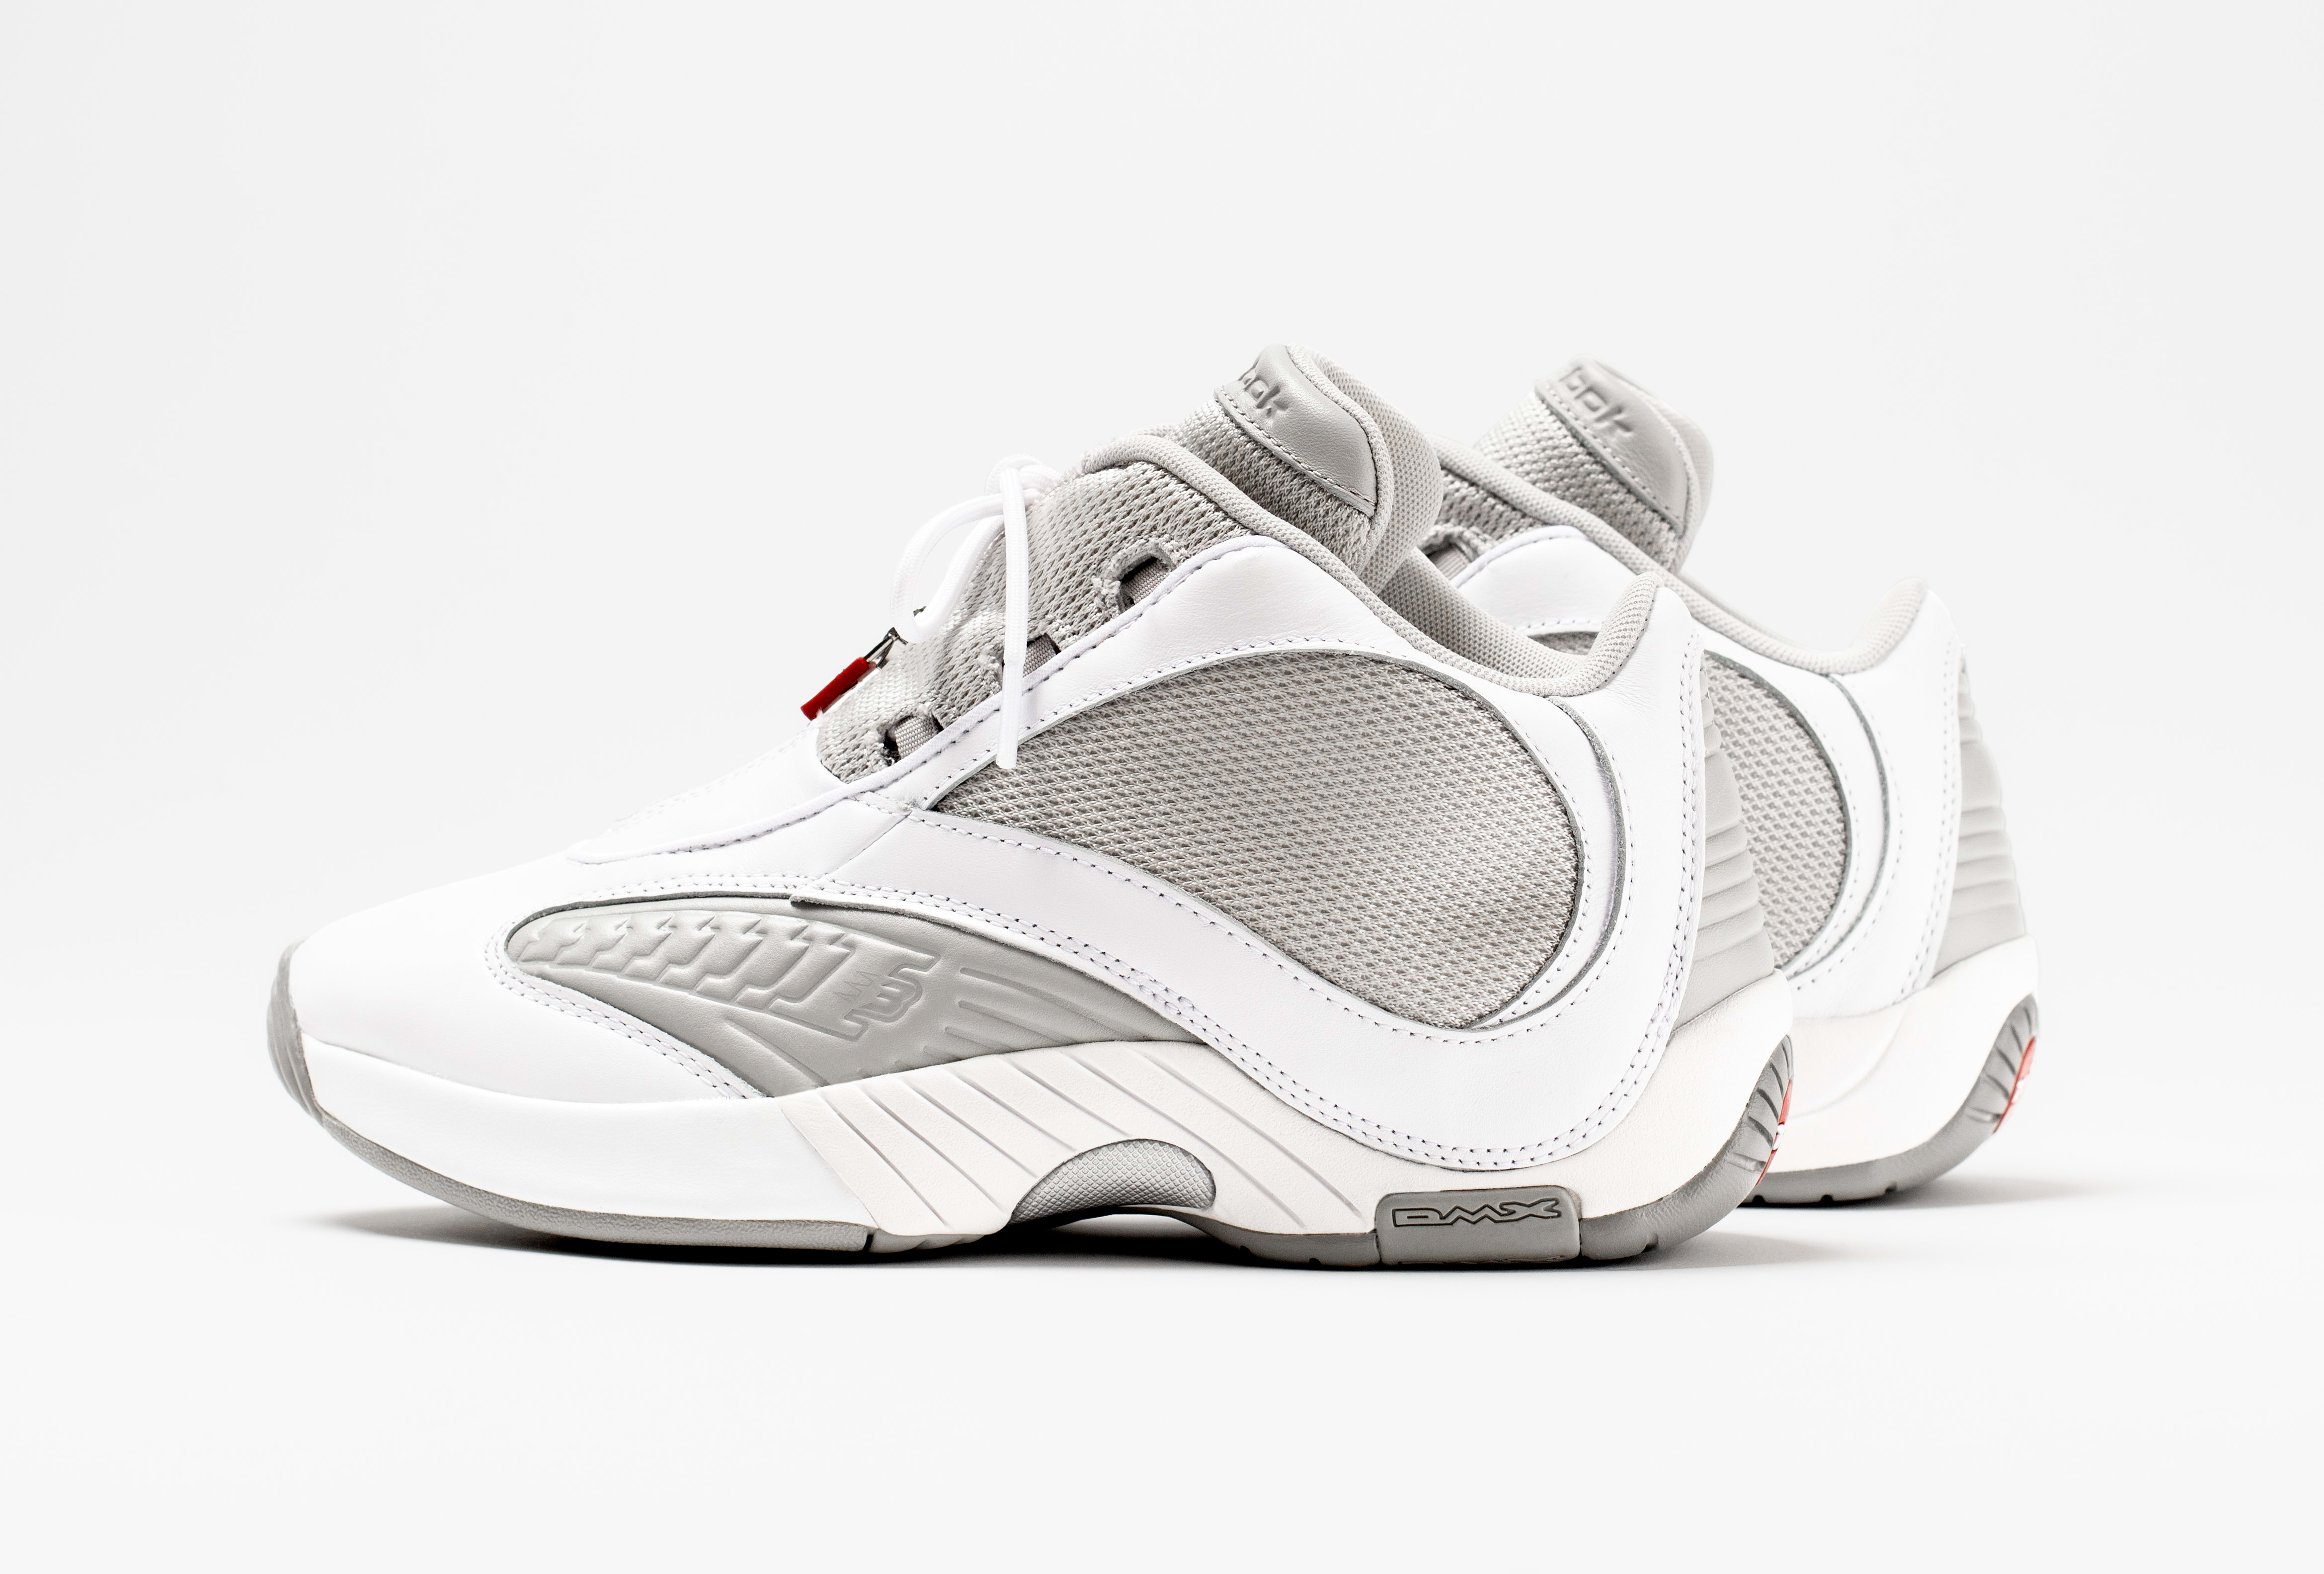 Packer x Reebok Answer IV White/Silver GY4069 Lateral